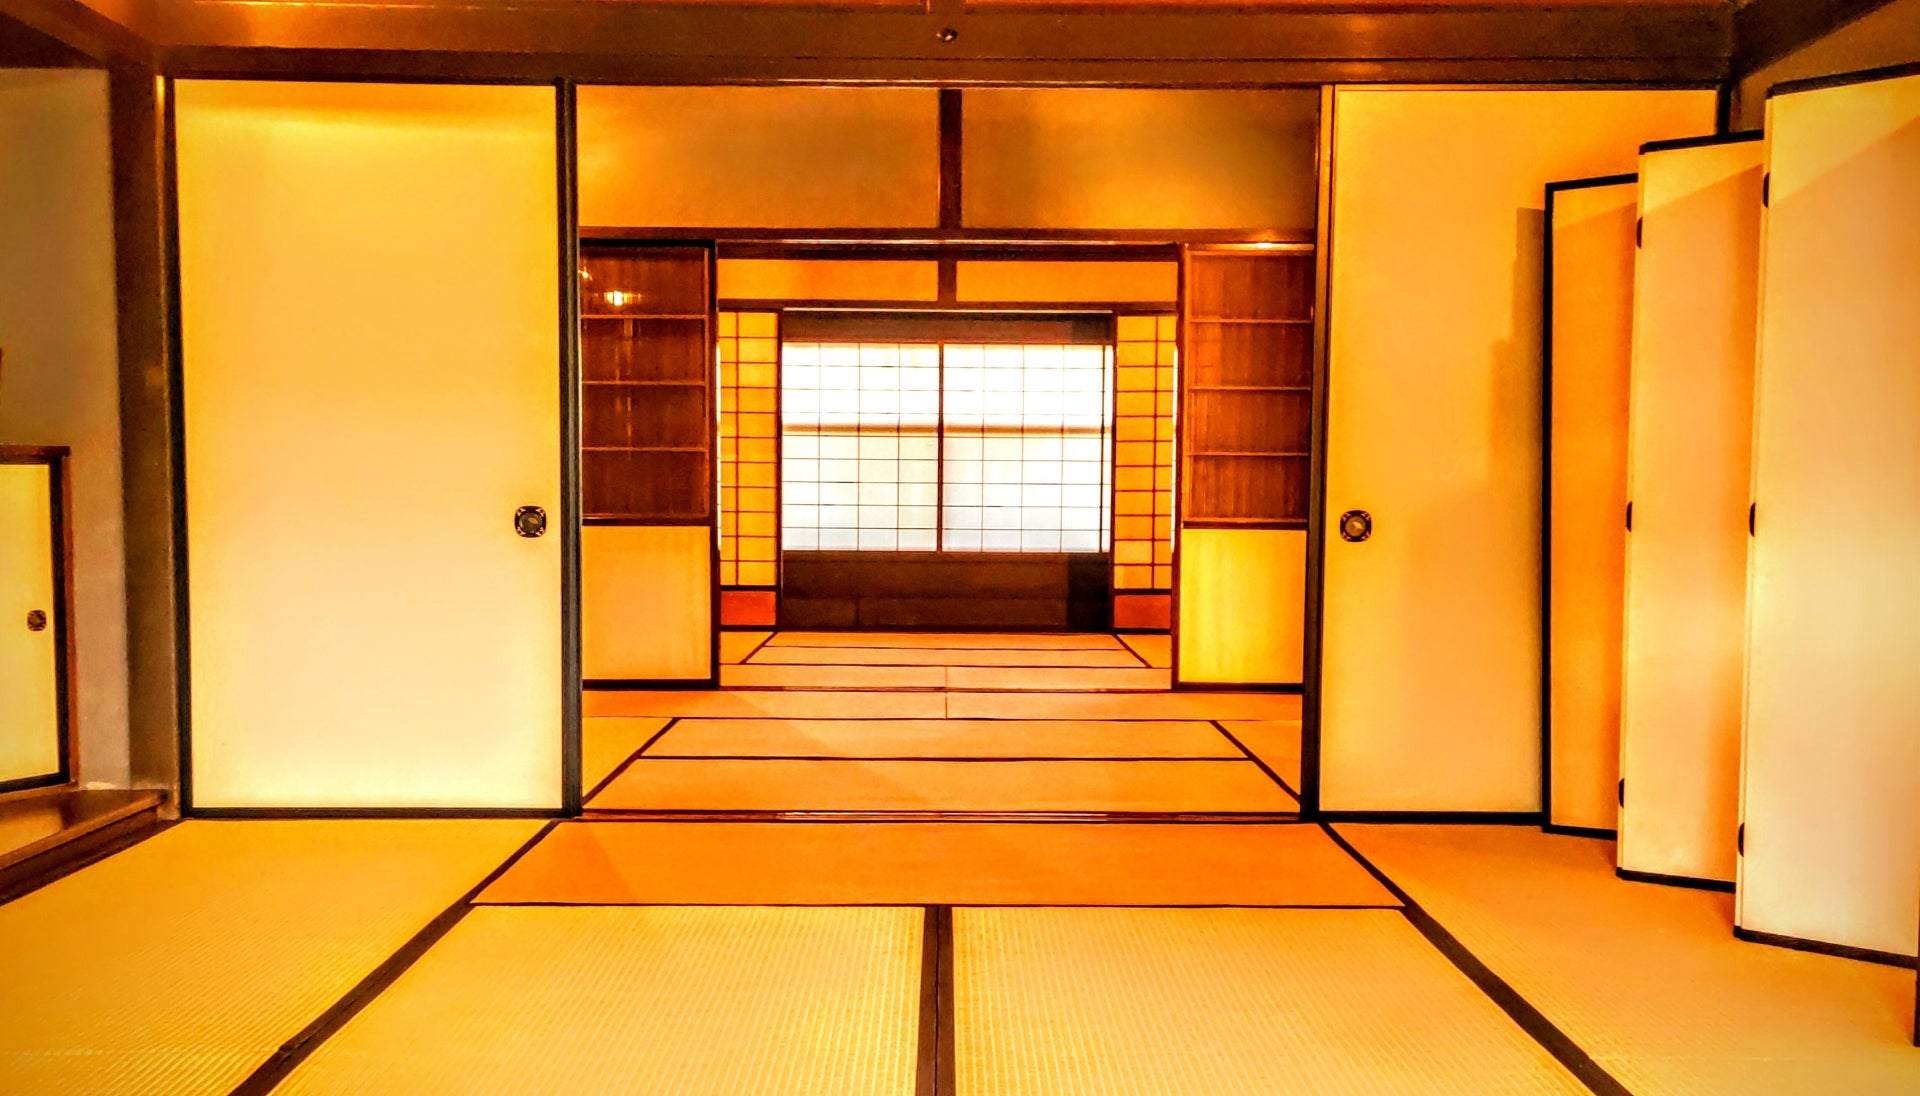 Tatami room is safe space for babies - Japanese Tatami Room